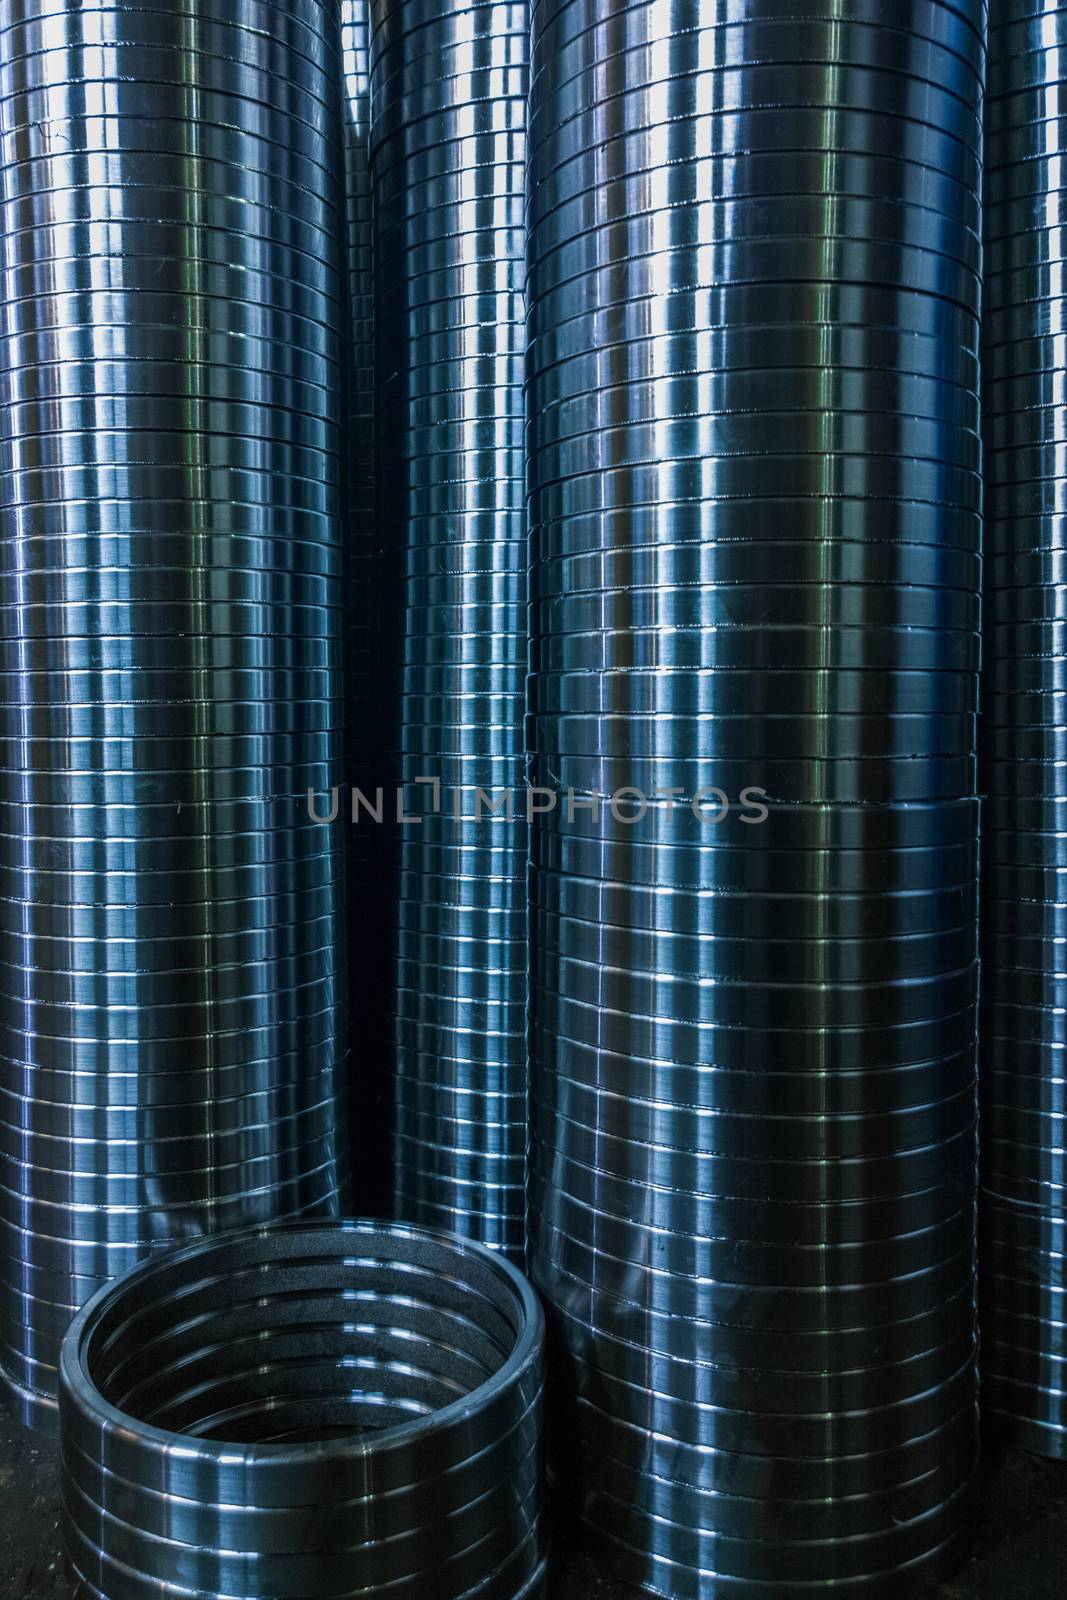 industrial manufacturing background of columns of shiny metal rings after cnc turning operation. Selective focus technique.